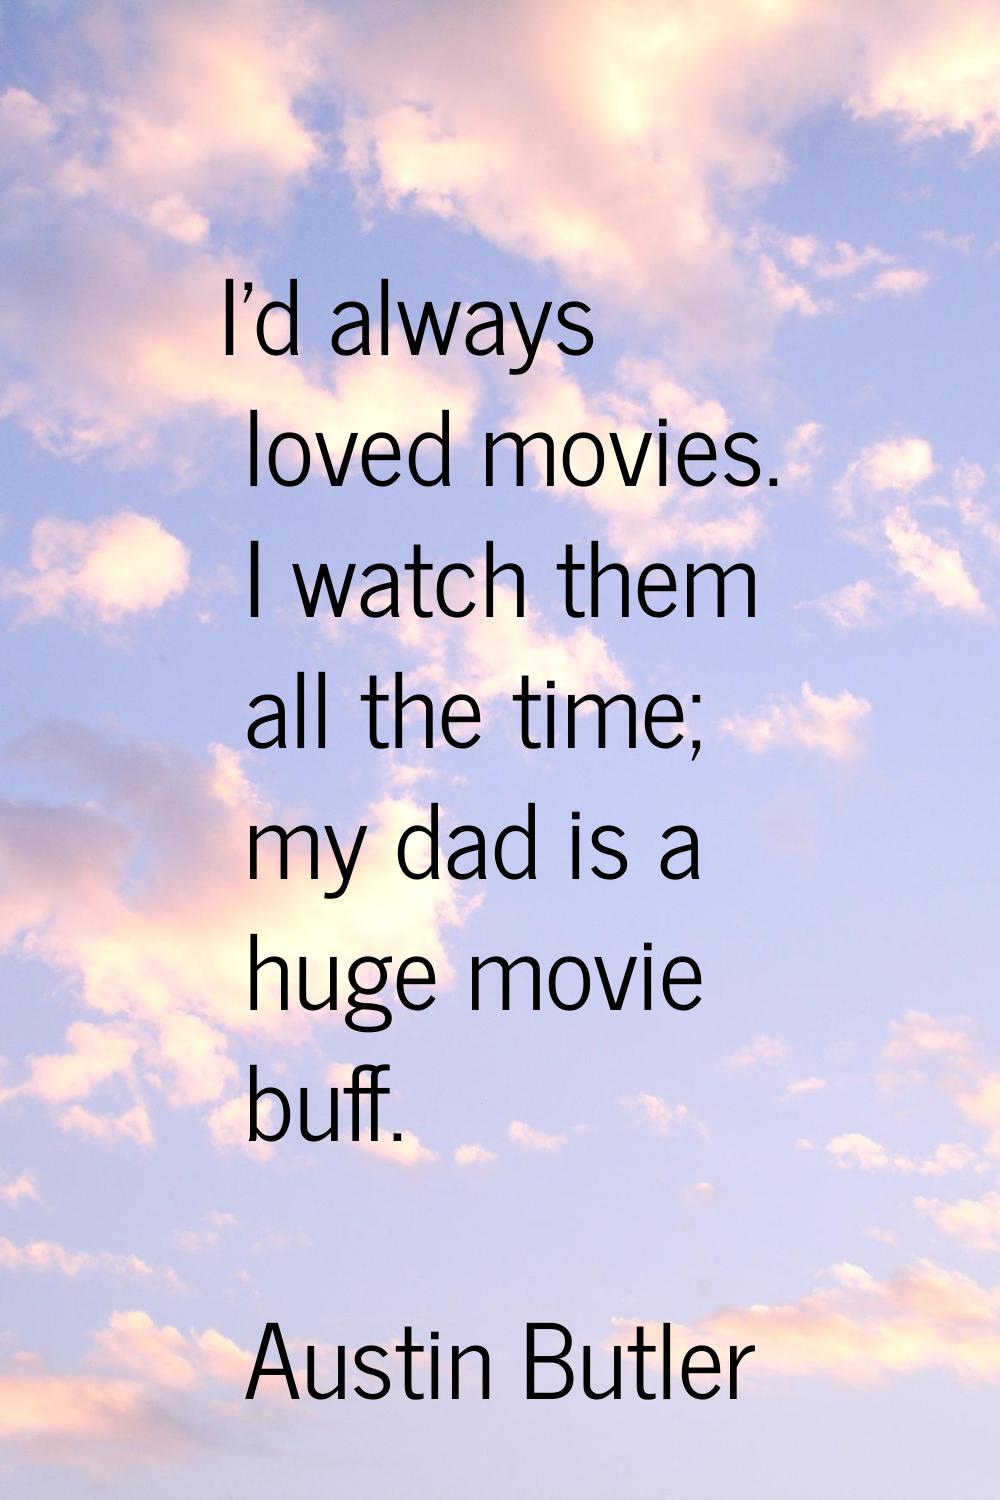 I'd always loved movies. I watch them all the time; my dad is a huge movie buff.